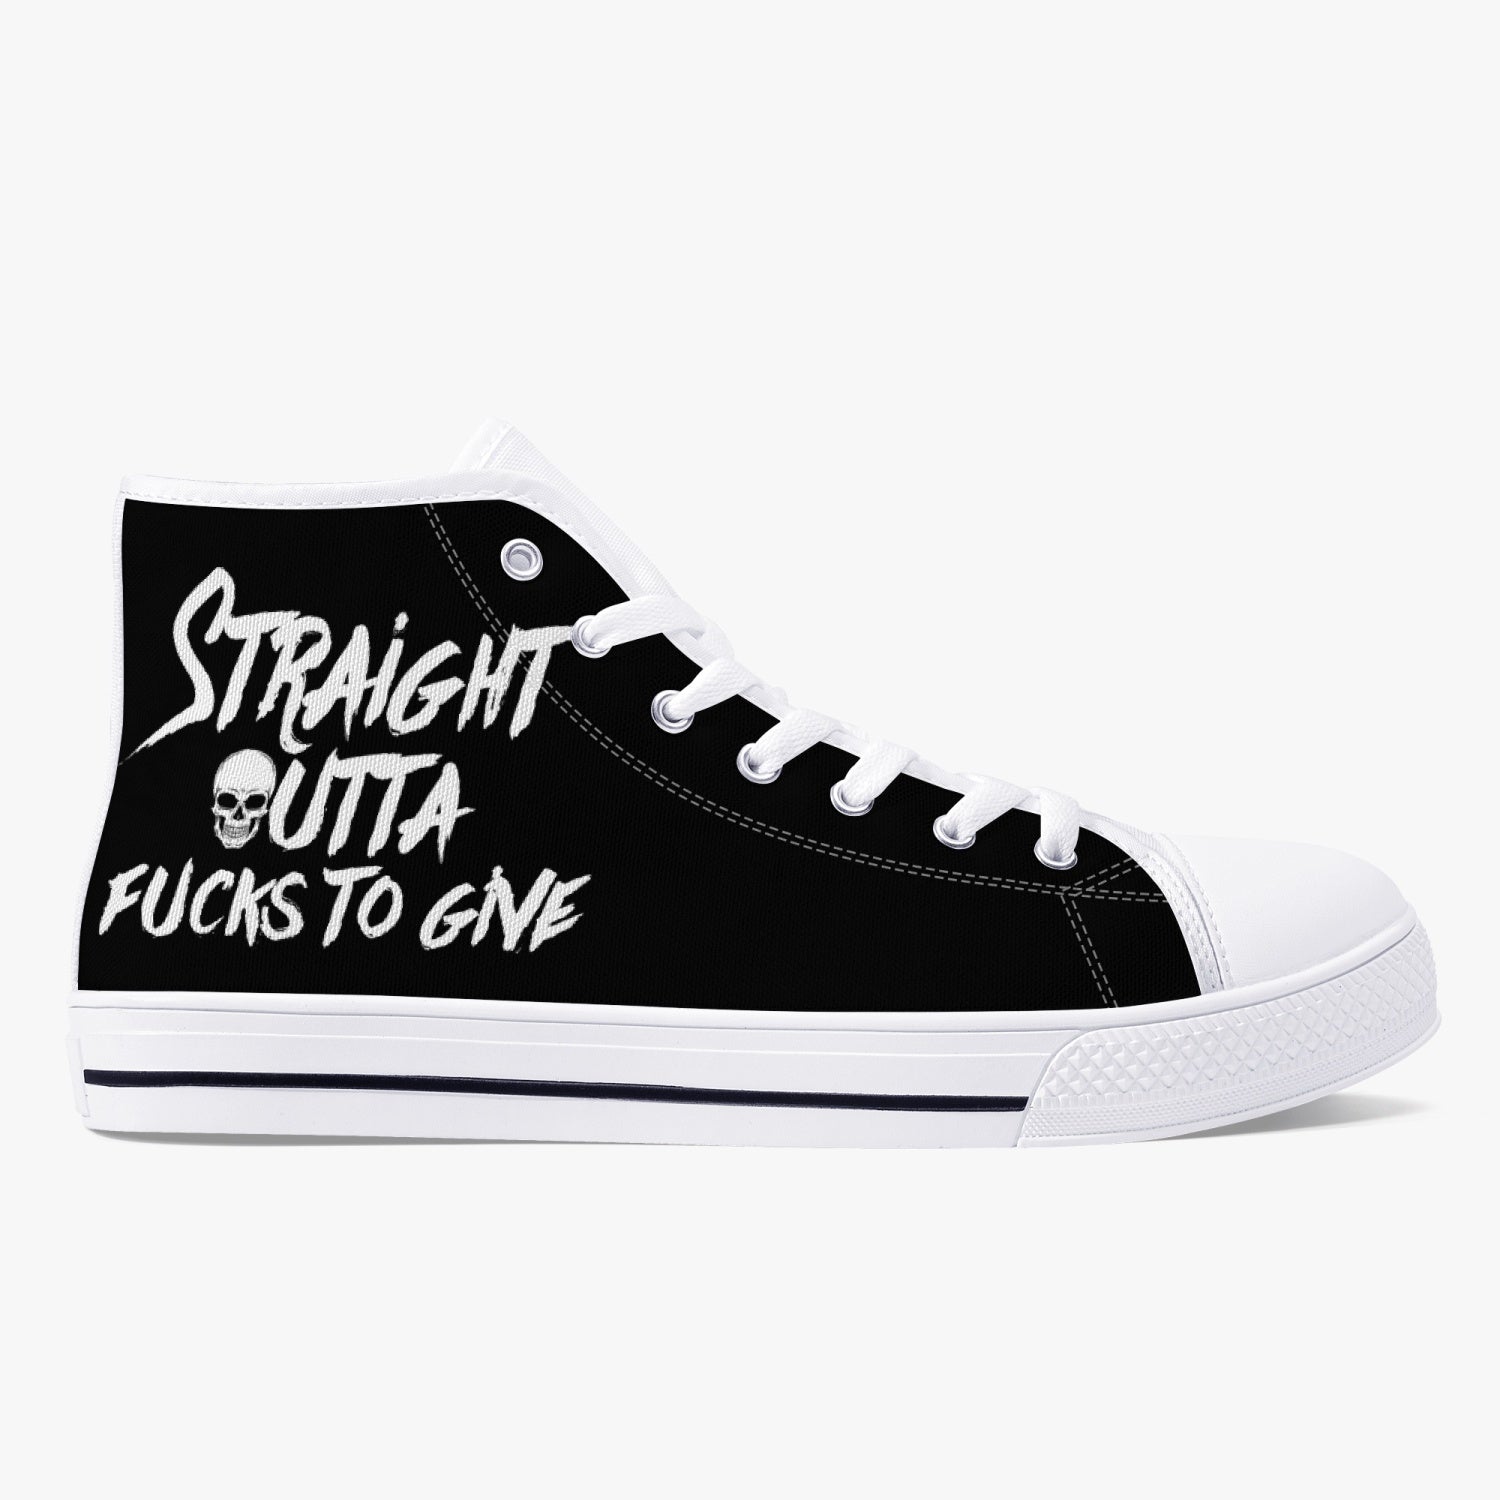 STRAIGHT OUTTA F TO GIVE HIGH TOP CANVAS SHOES - TY1010222